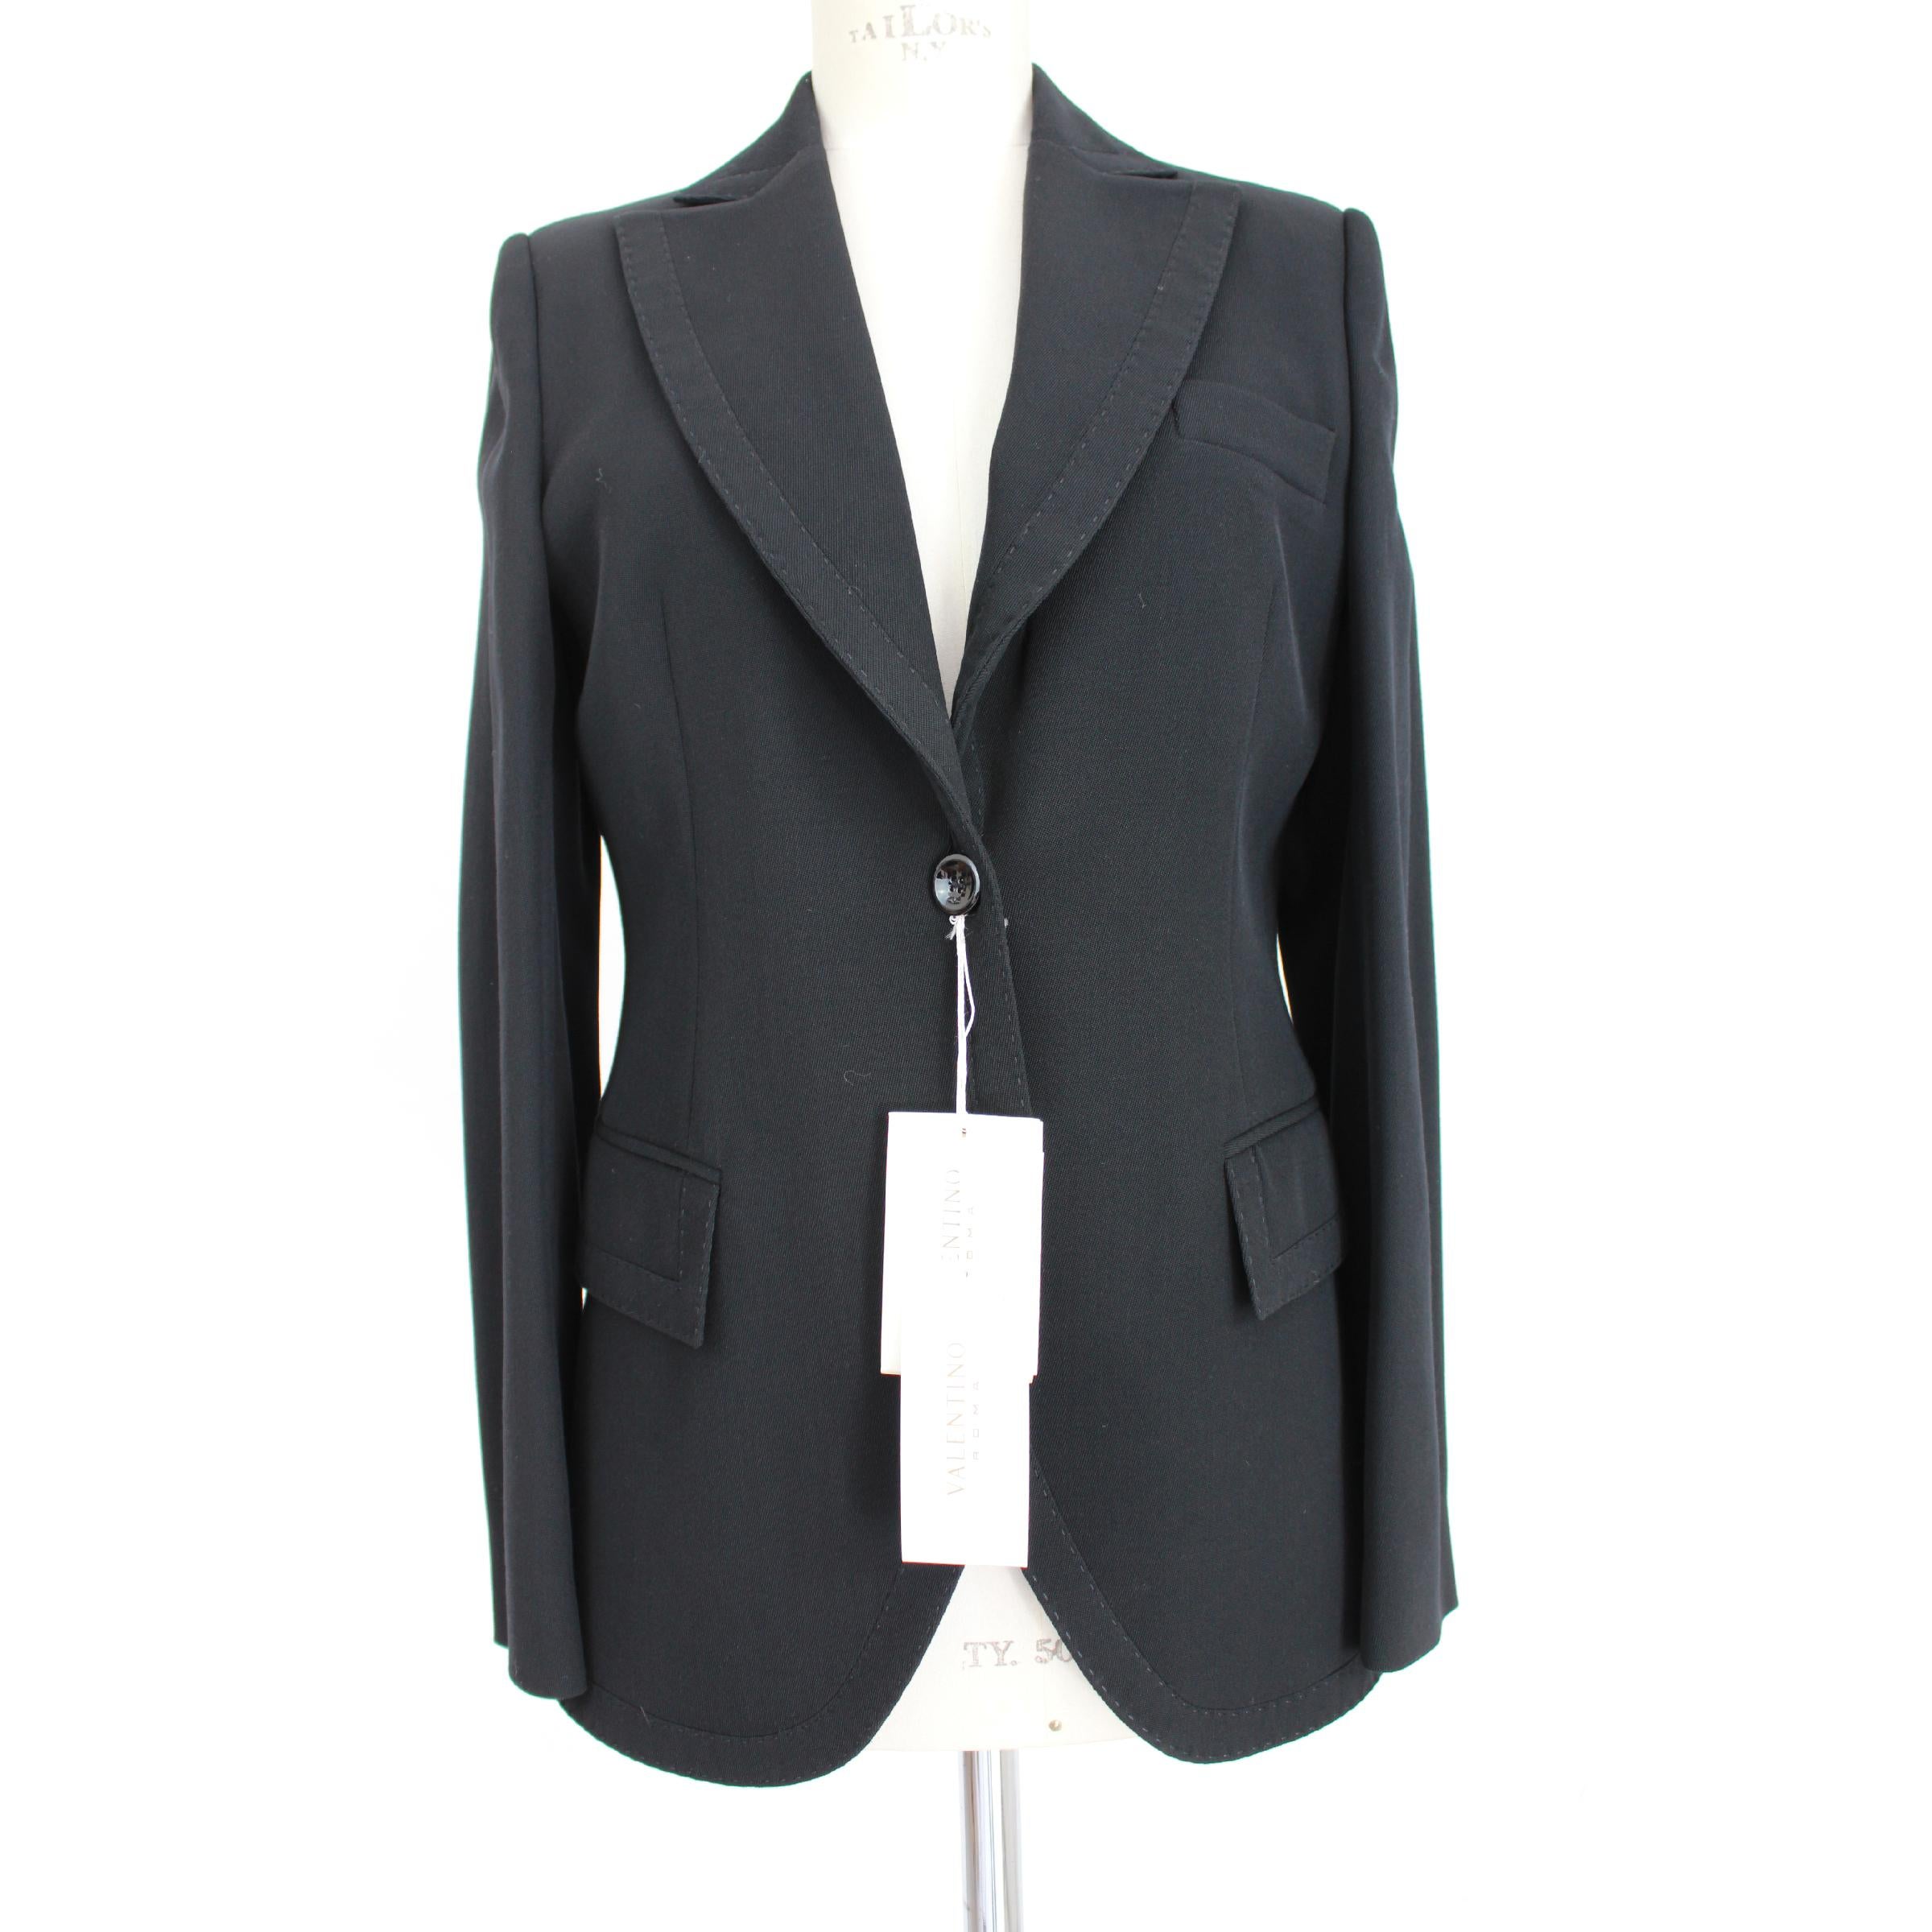 Valentino Roma vintage women's pants suit. Jacket and classic trousers, black, 100% virgin wool, palazzo pants, lined jacket. 90s. Made in Italy. New with tag.

Size: 46 It 12 Us 14 Uk 

Shoulder: 46 cm 
Bust / Chest: 51 cm 
Sleeve: 63 cm 
Length: